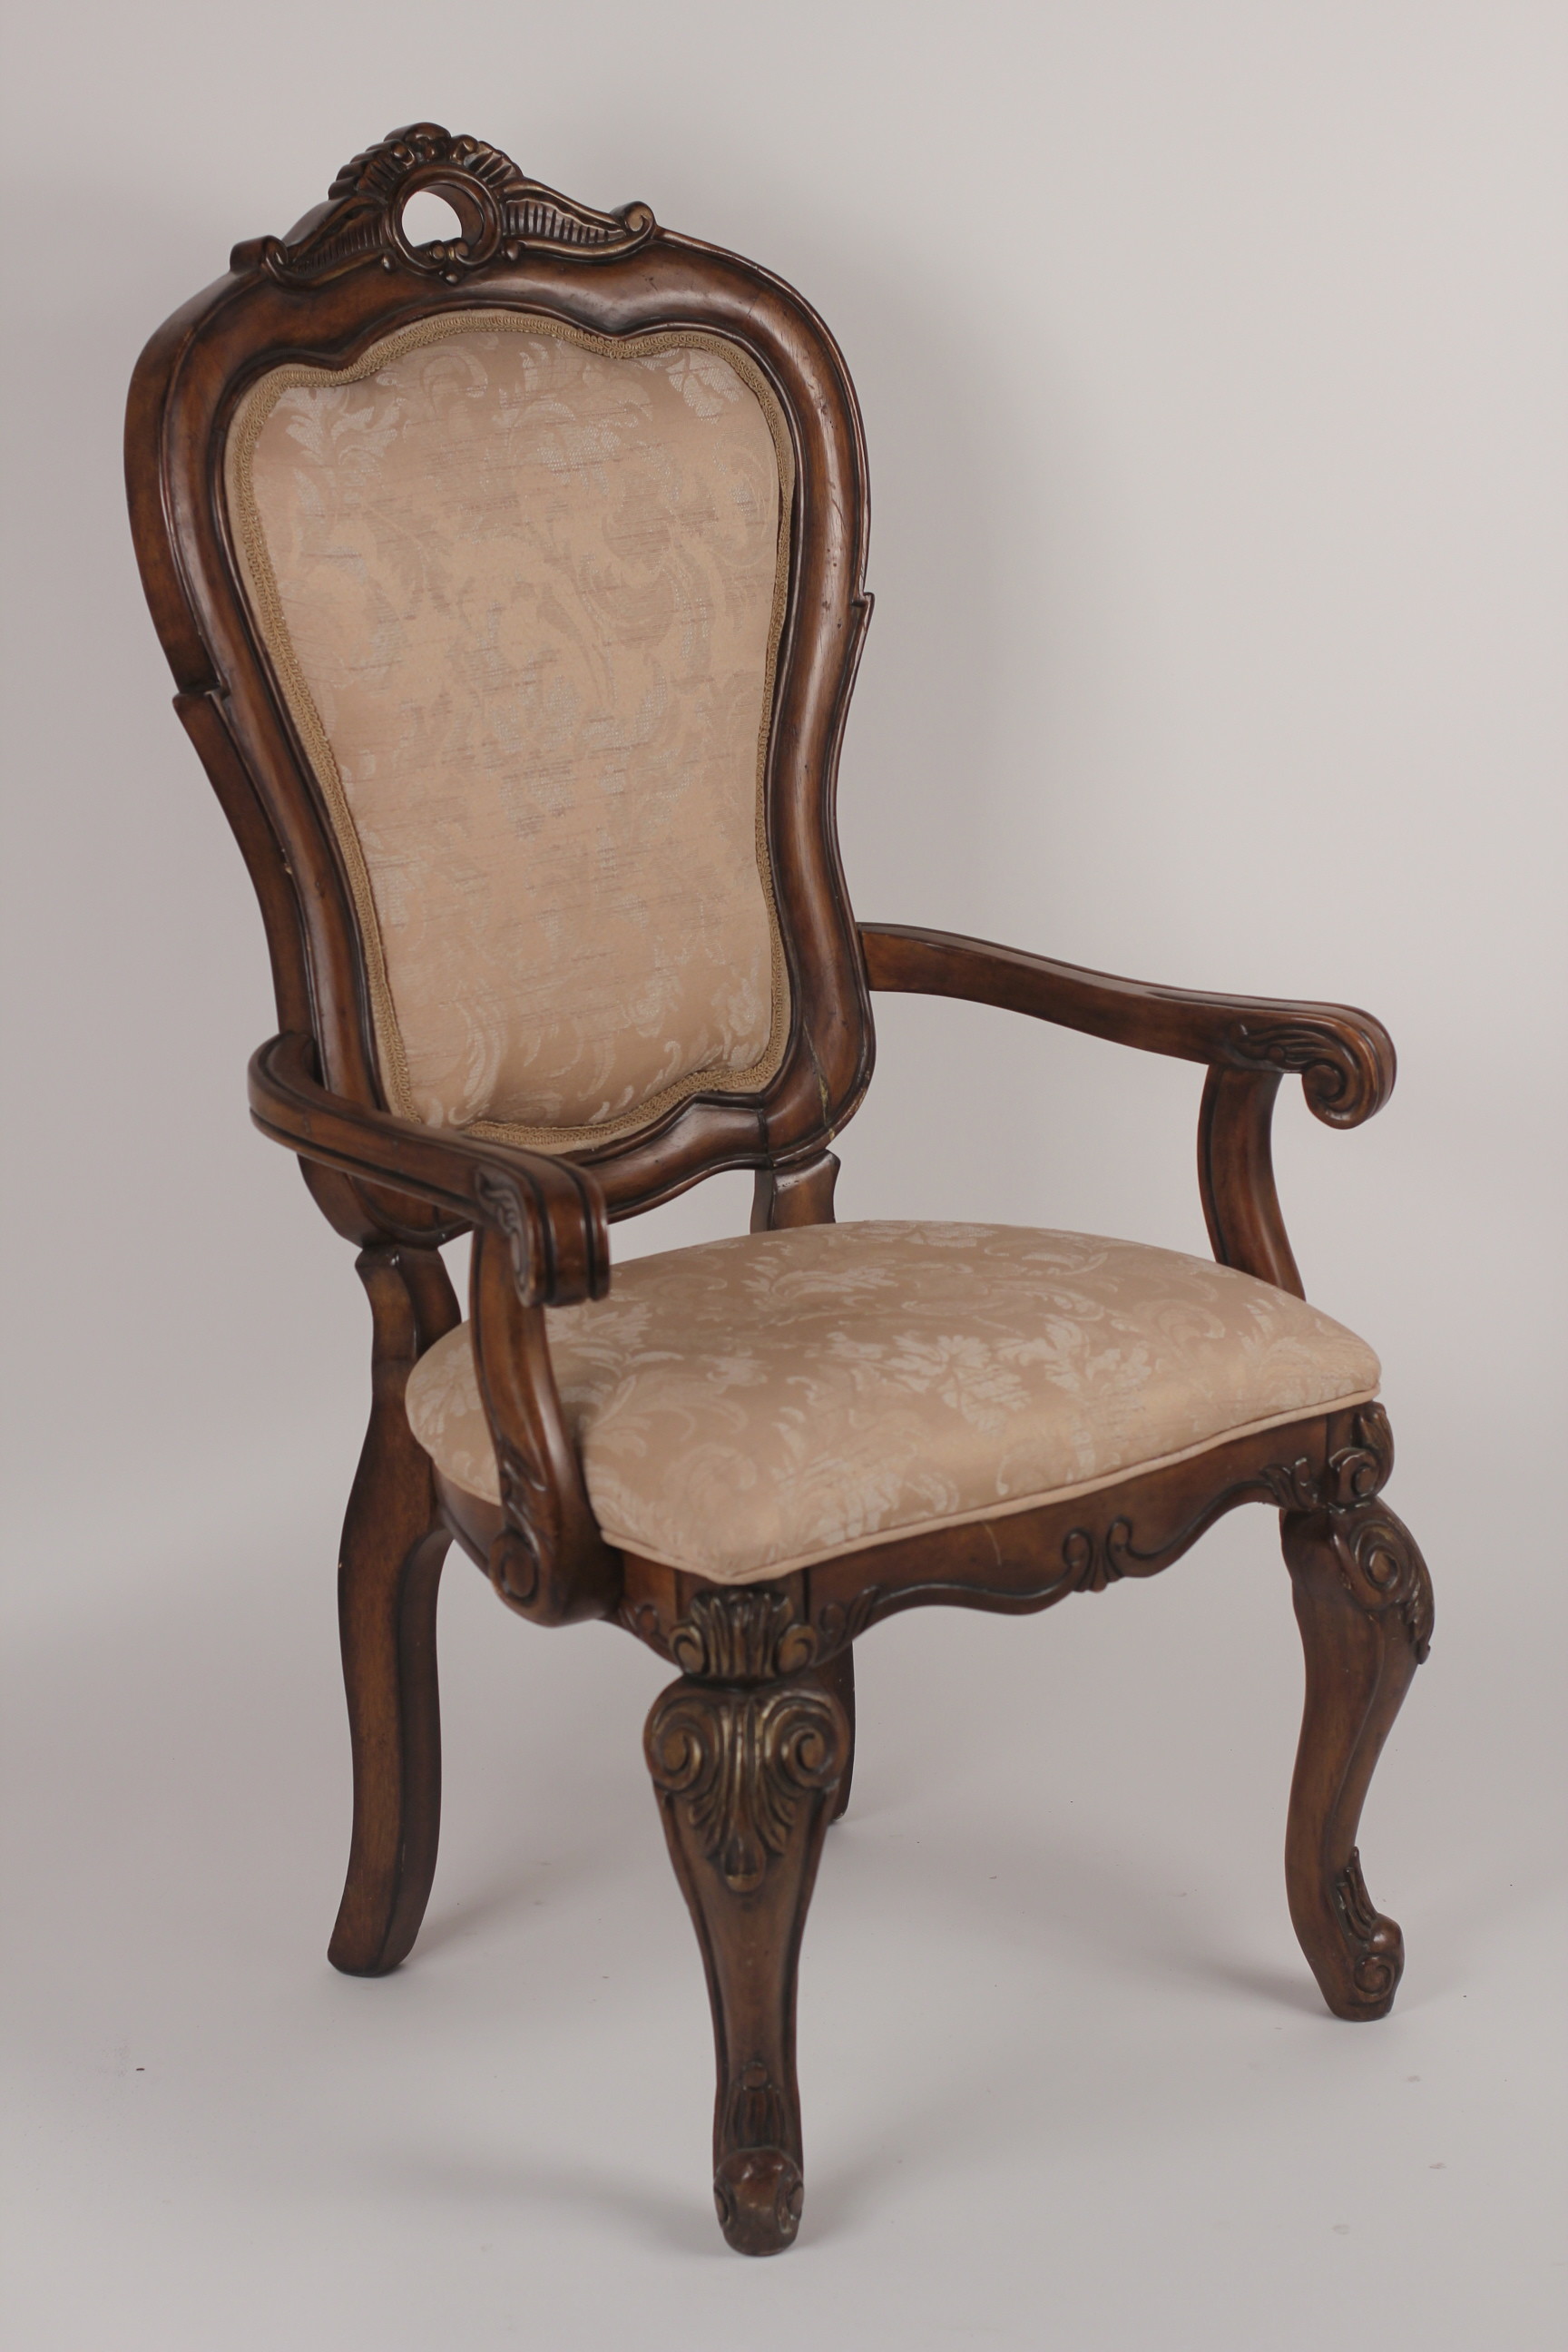 Queen Anne Furniture For Sale Fresh Queen Anne Chairs For Sale 14365 House Decorating Ideas